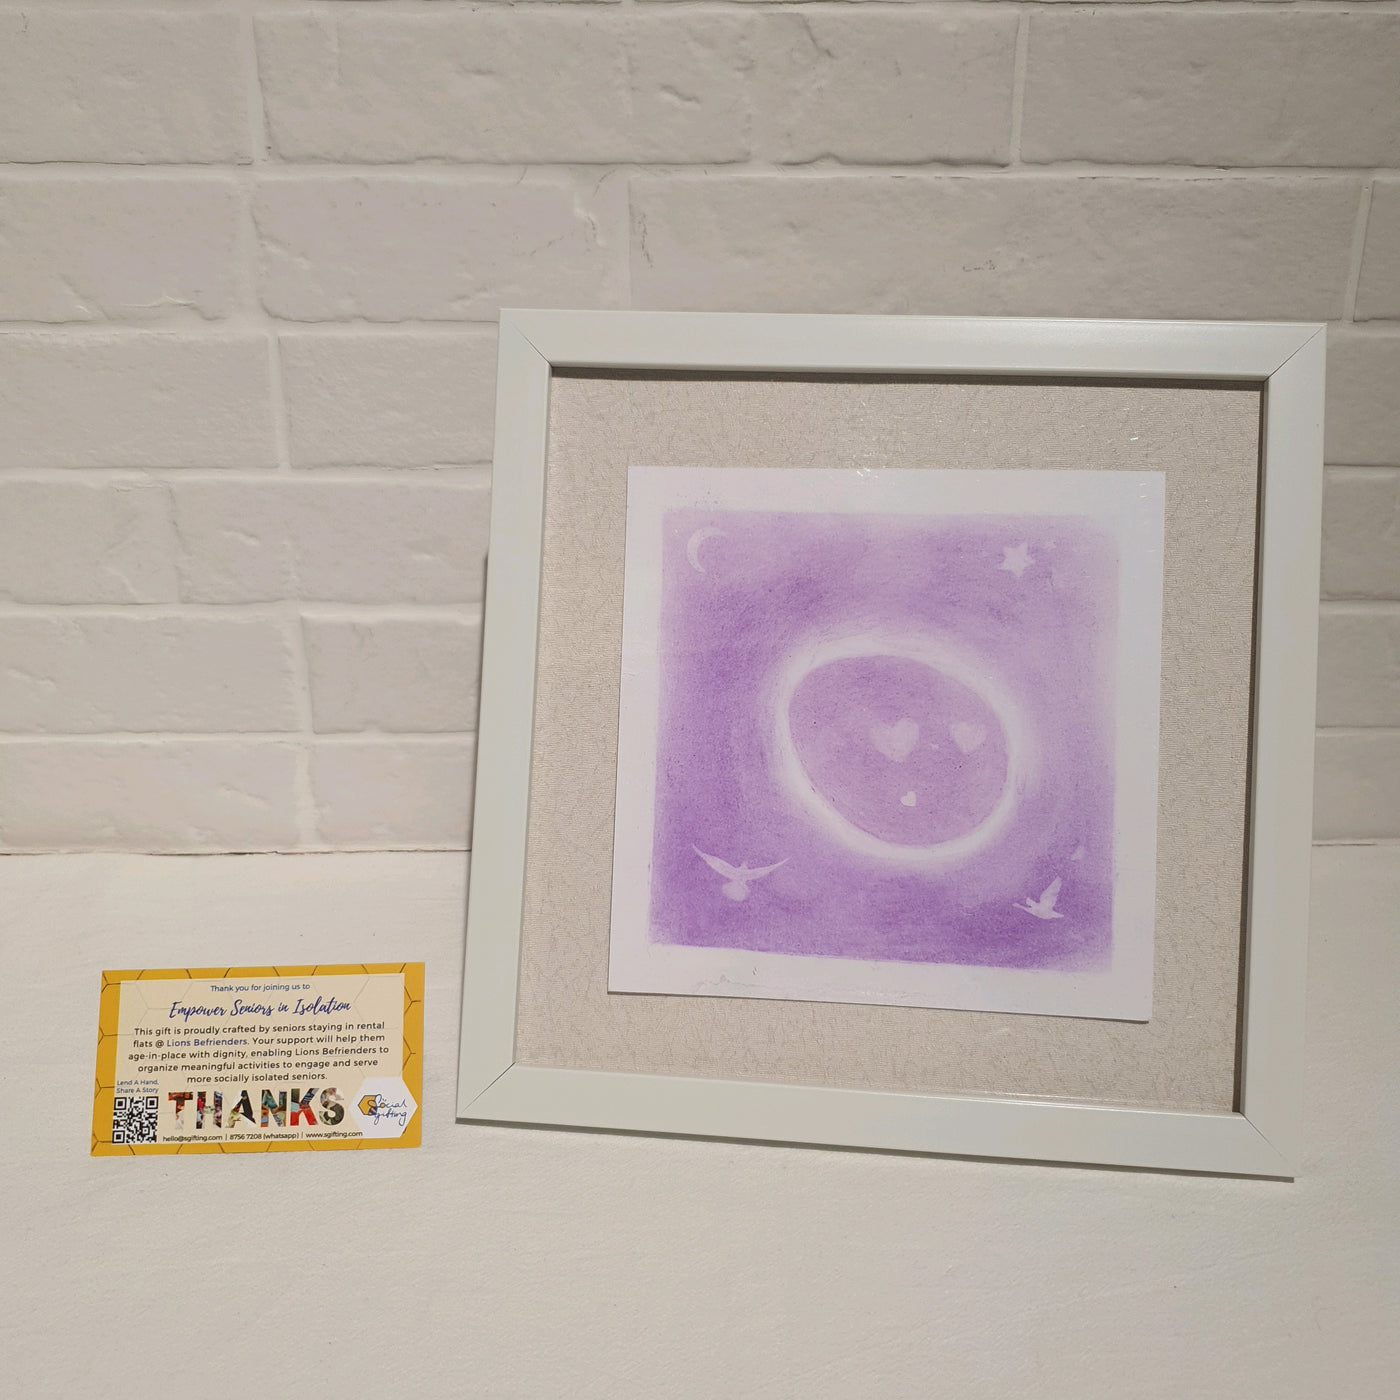 Watercolour painting with frame